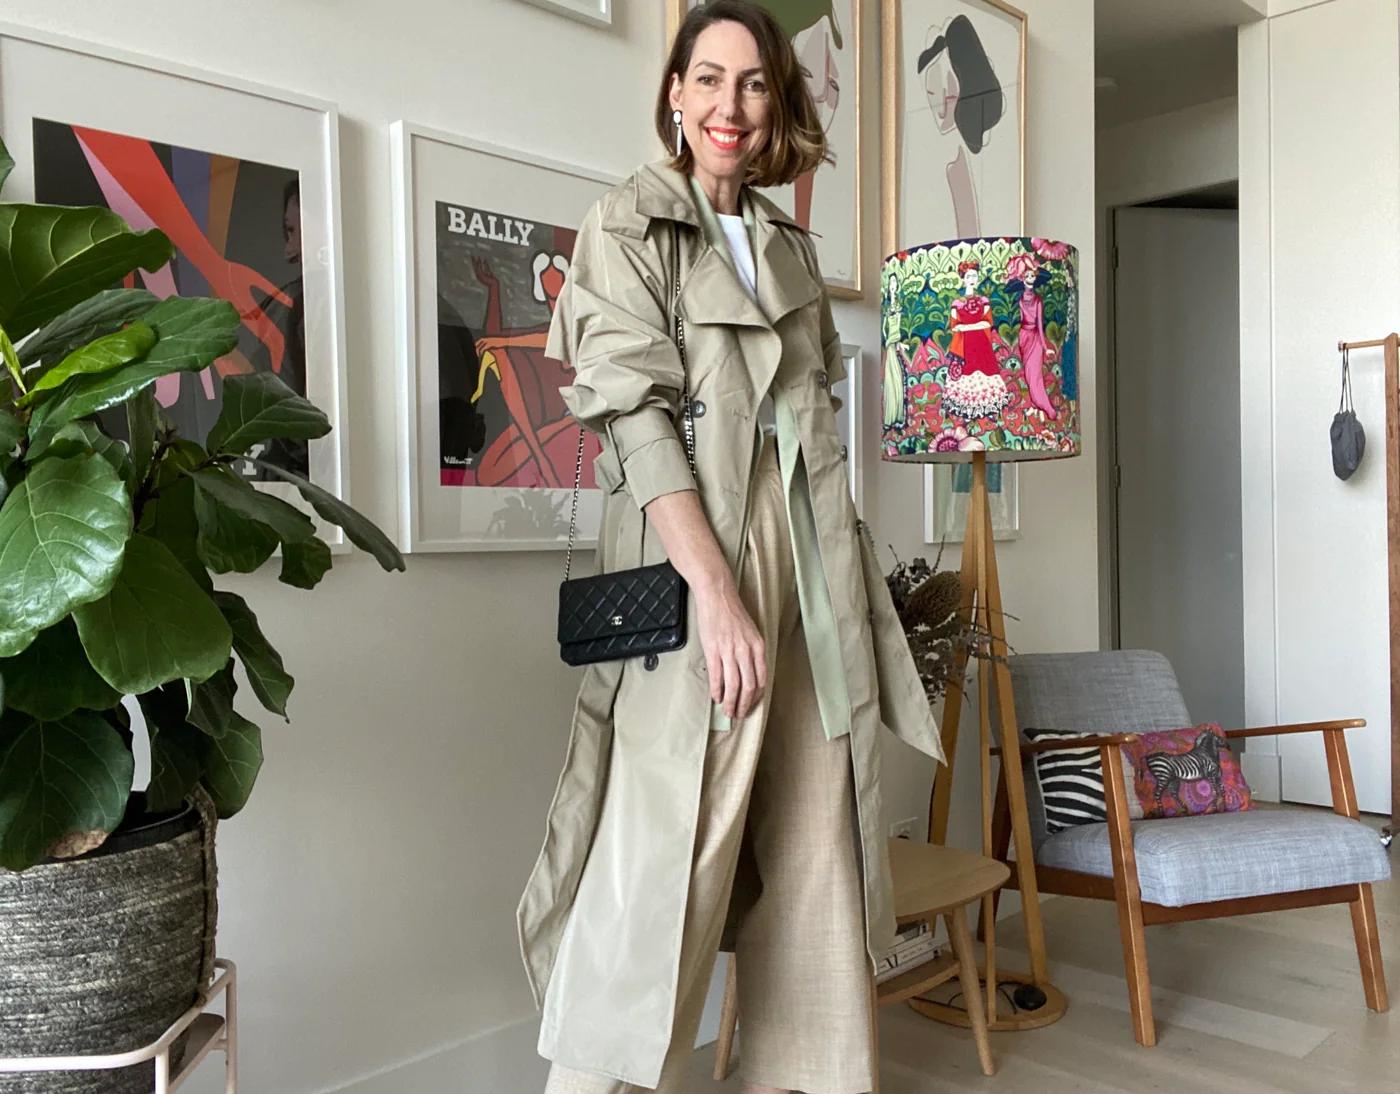 Top Styling Tips From a Leading Melbourne Stylist